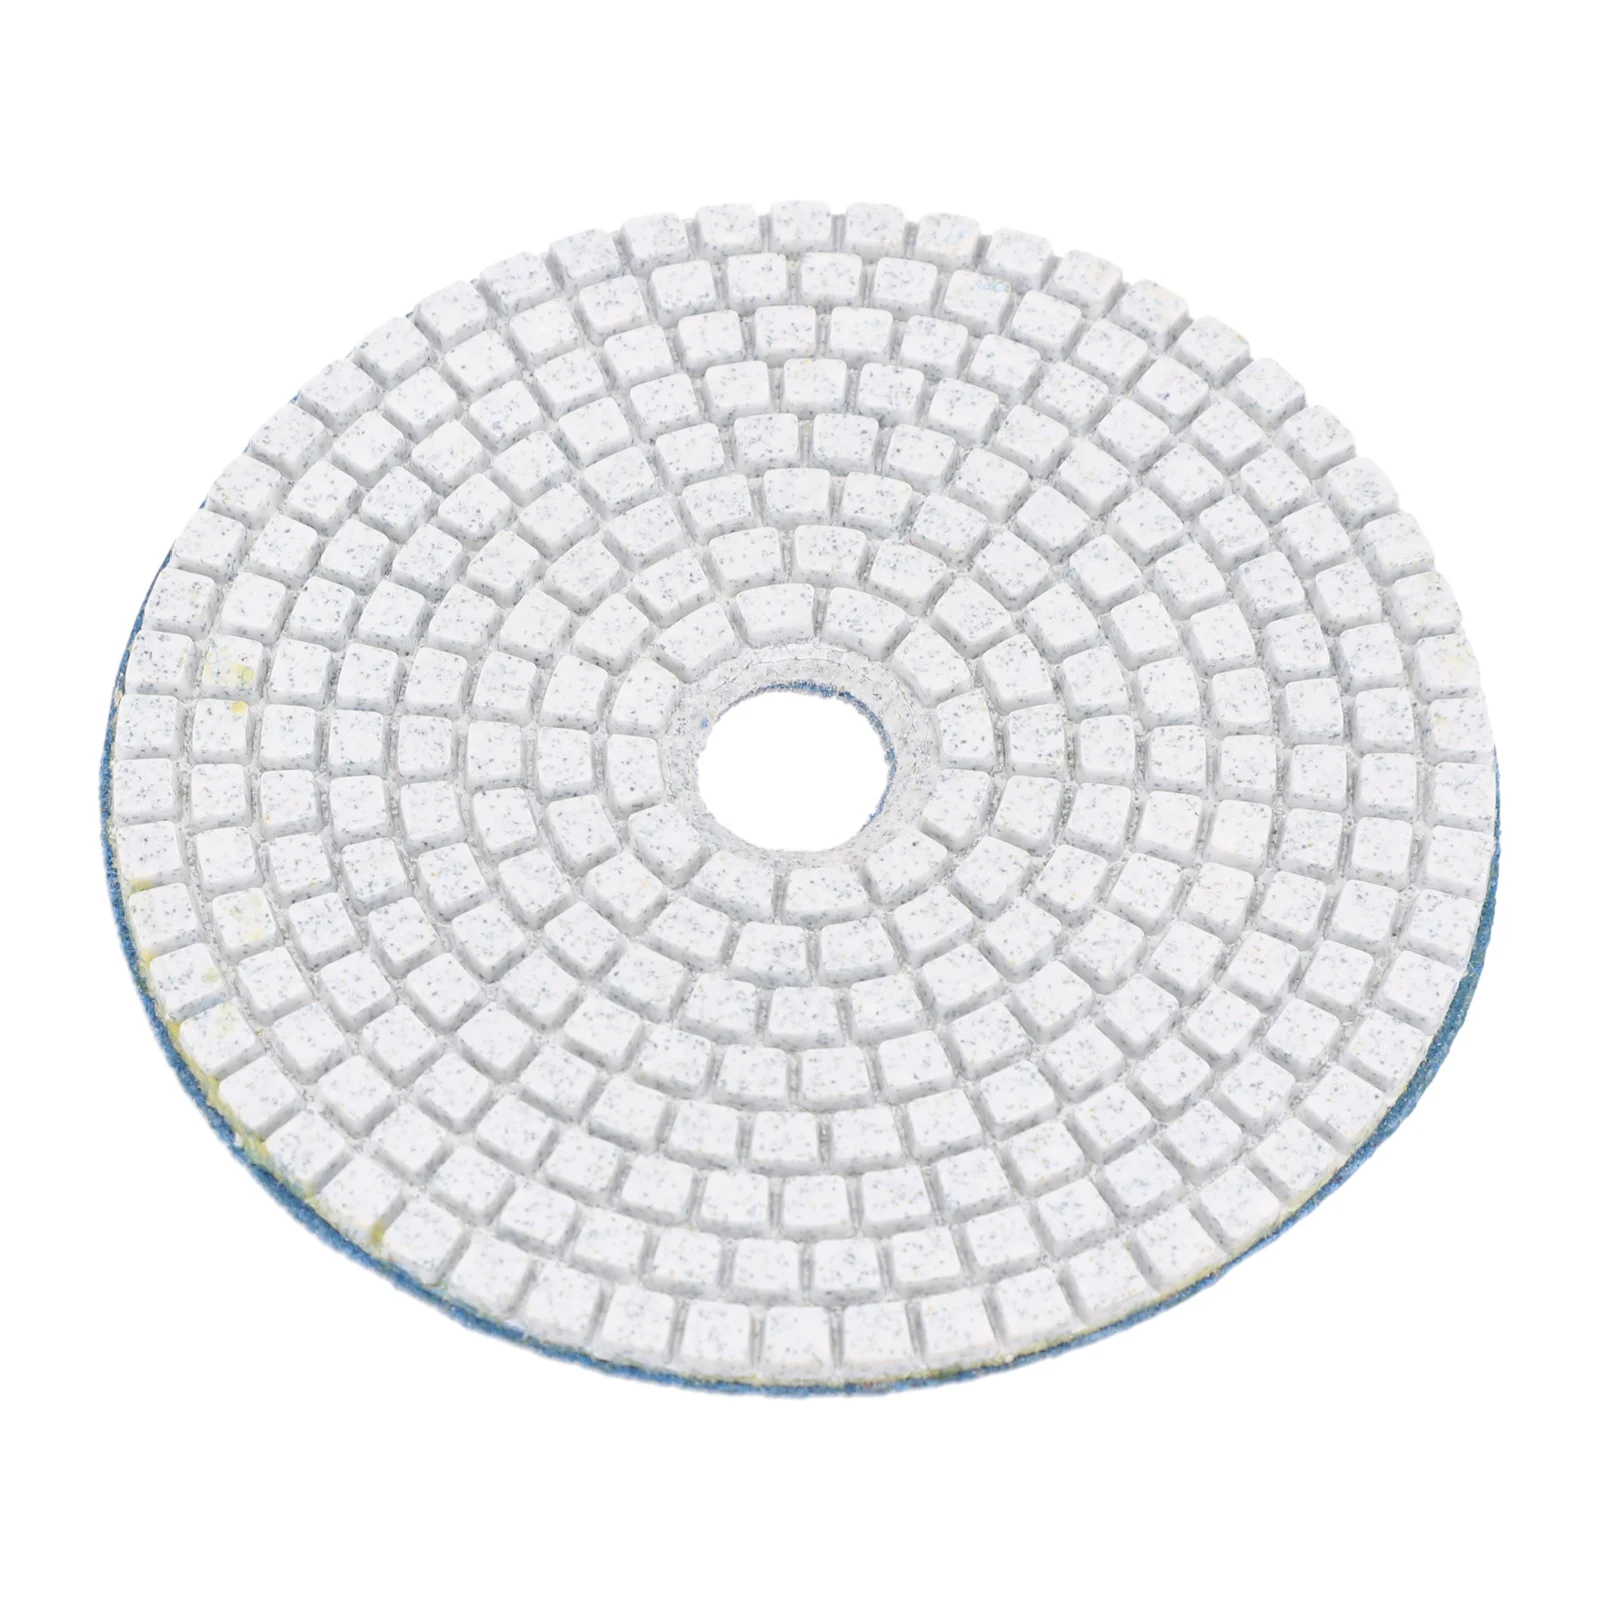 5 Inch Polishing Pad Dry/wet Diamond Polishing Pads Grinding Discs For Granite 30/100/150/300/500/800/1000/1500/2000/3000# hugercok t71ks rugged tablet pc 1000 nit 7 inch rtk gnss surveying equipment gnss gps